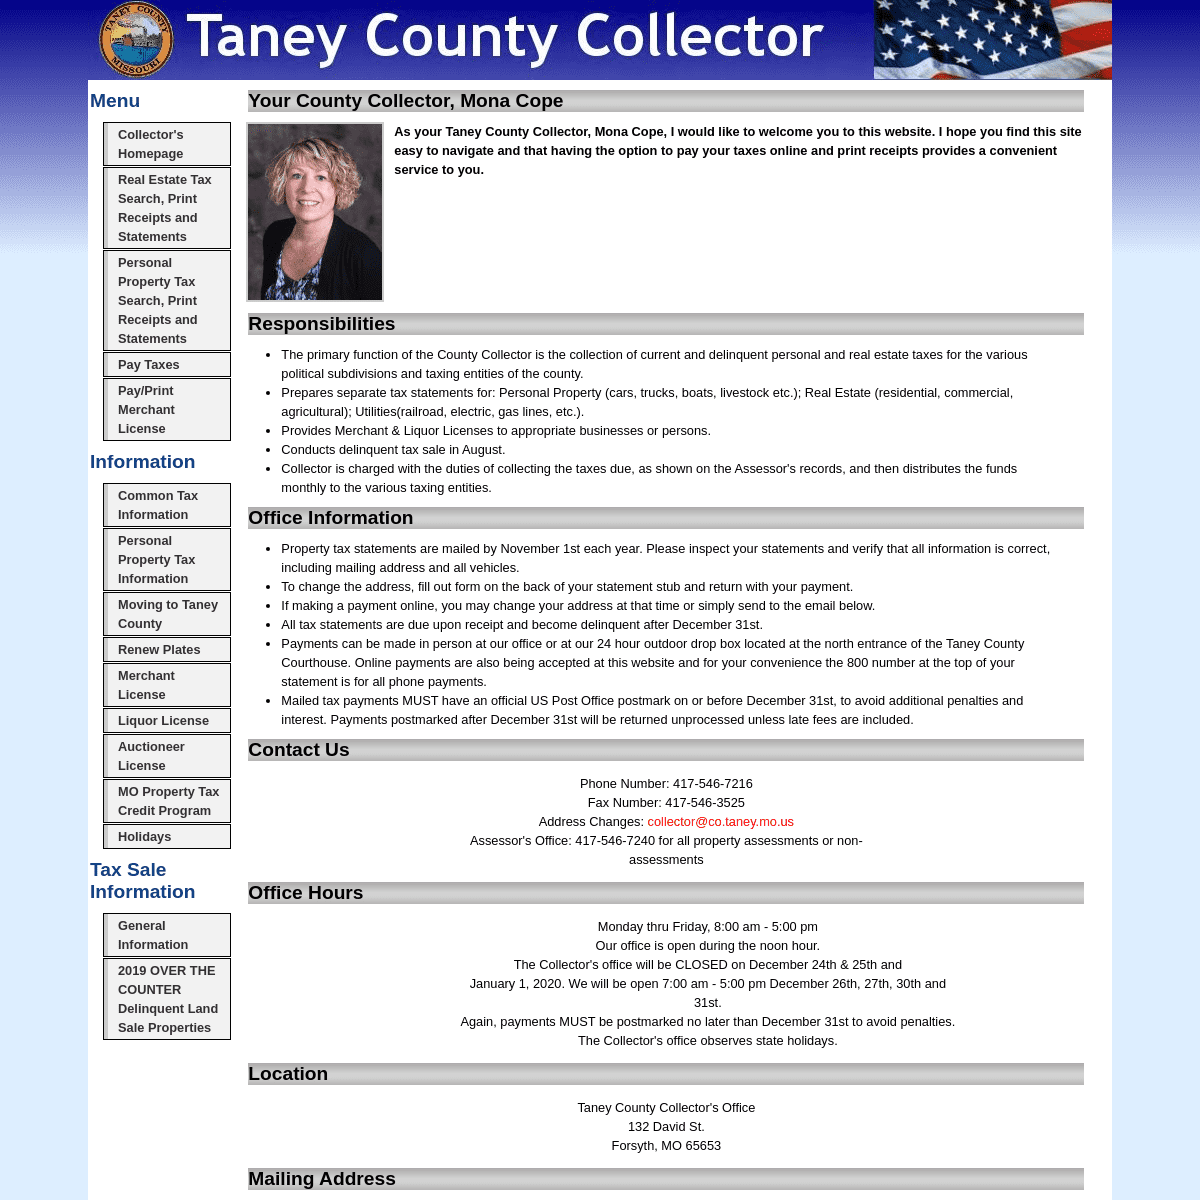 A complete backup of taneycountycollector.com